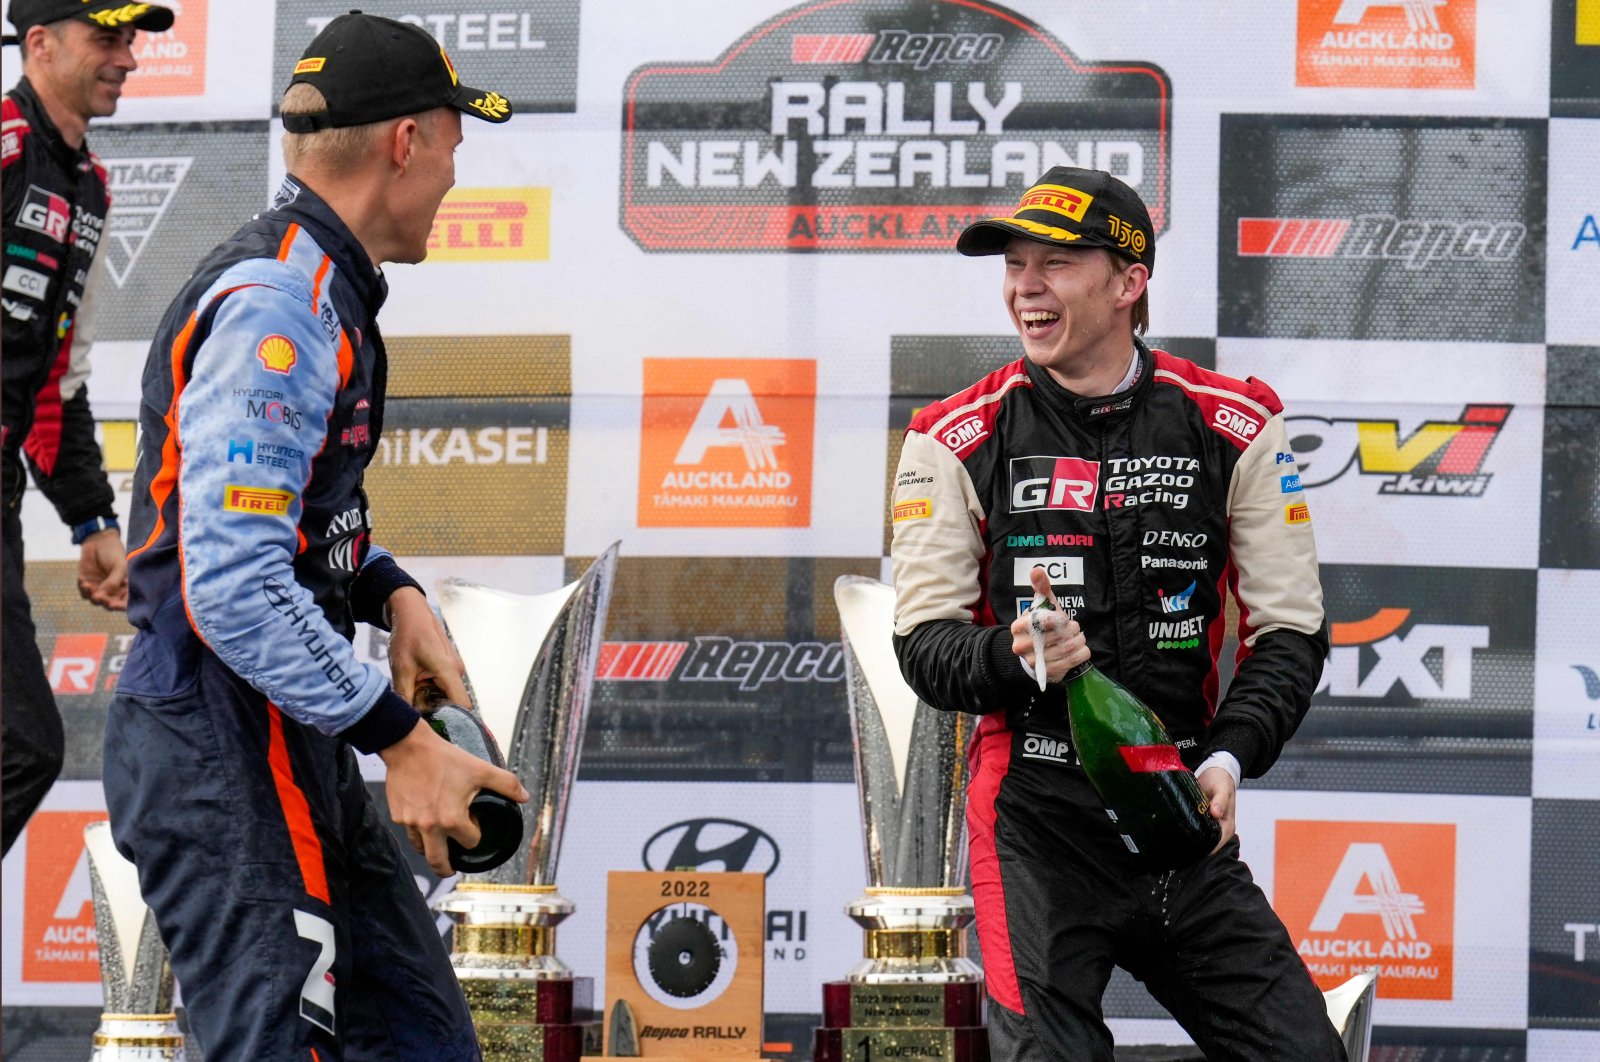 Estonia&#039;s Ott Tanak (L) and Finland&#039;s Kalle Rovanpera celebrate on the podium of the Rally New Zealand, the 11th round of the FIA World Rally Championship, at Jacks Ridge in the outskirts, Auckland, New Zealand, Oct. 2, 2022. (AFP Photo)